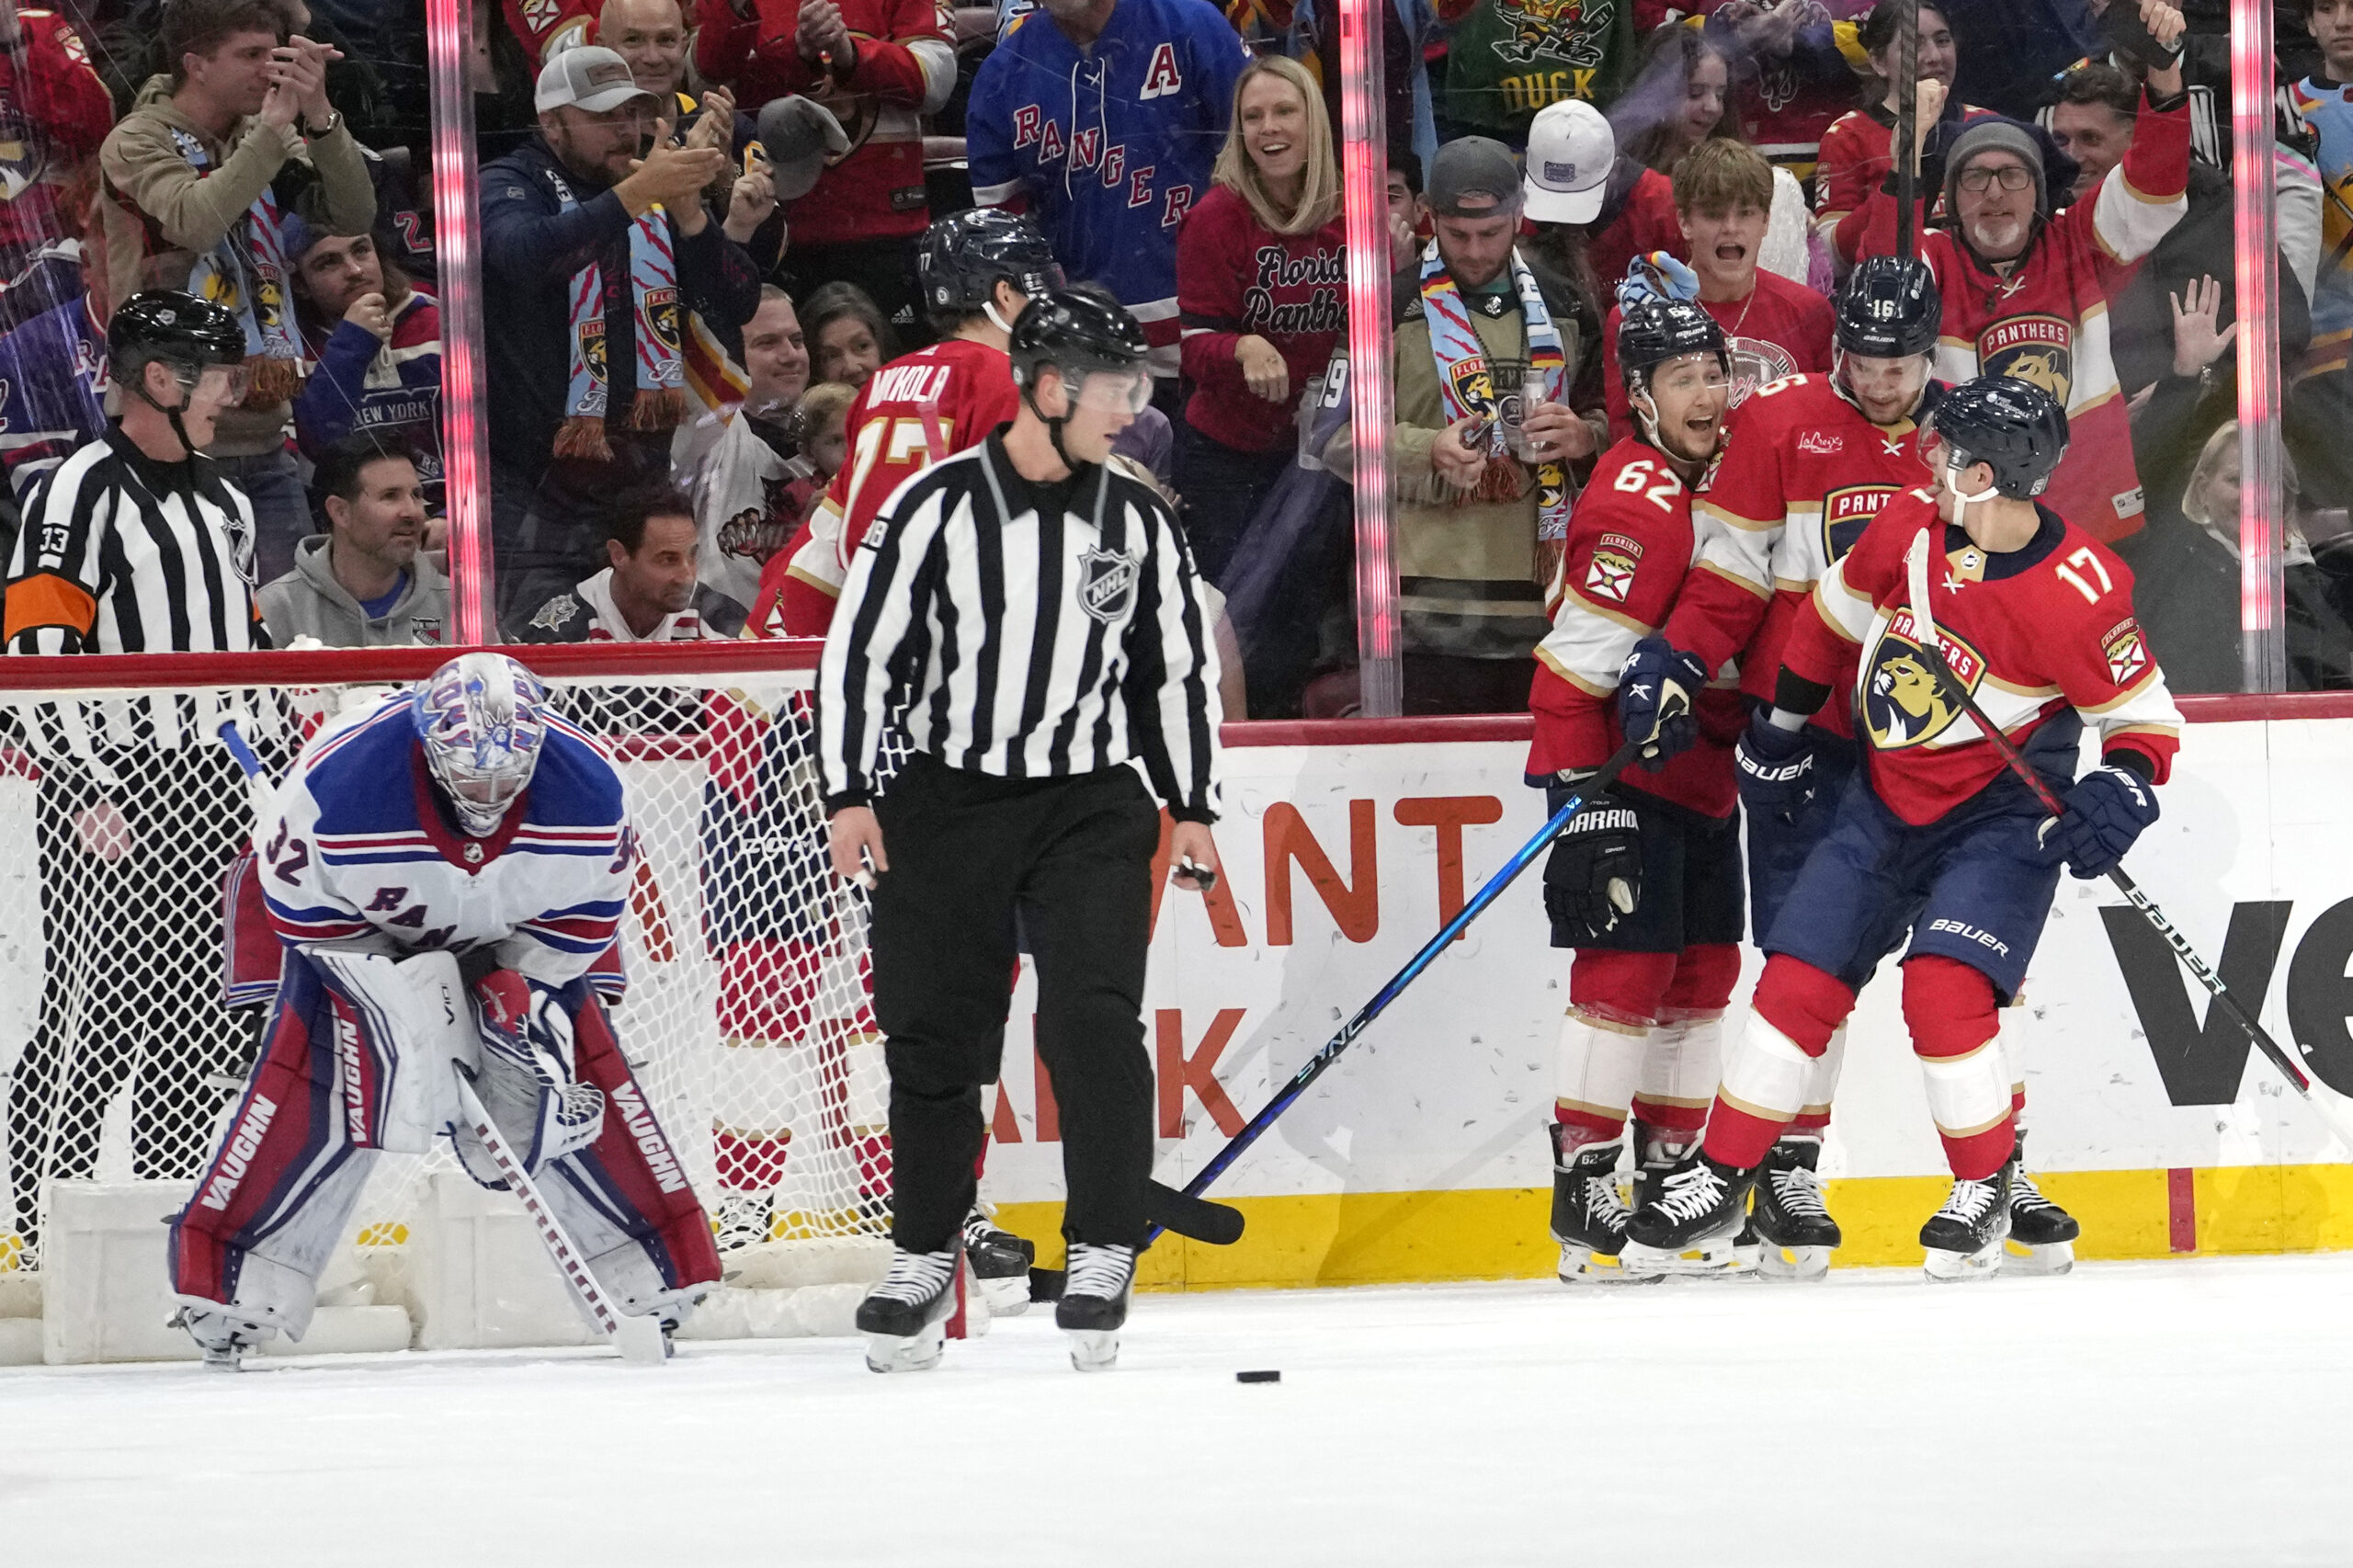 Panthers vs. Rangers: Preview of Eastern Conference Finals?